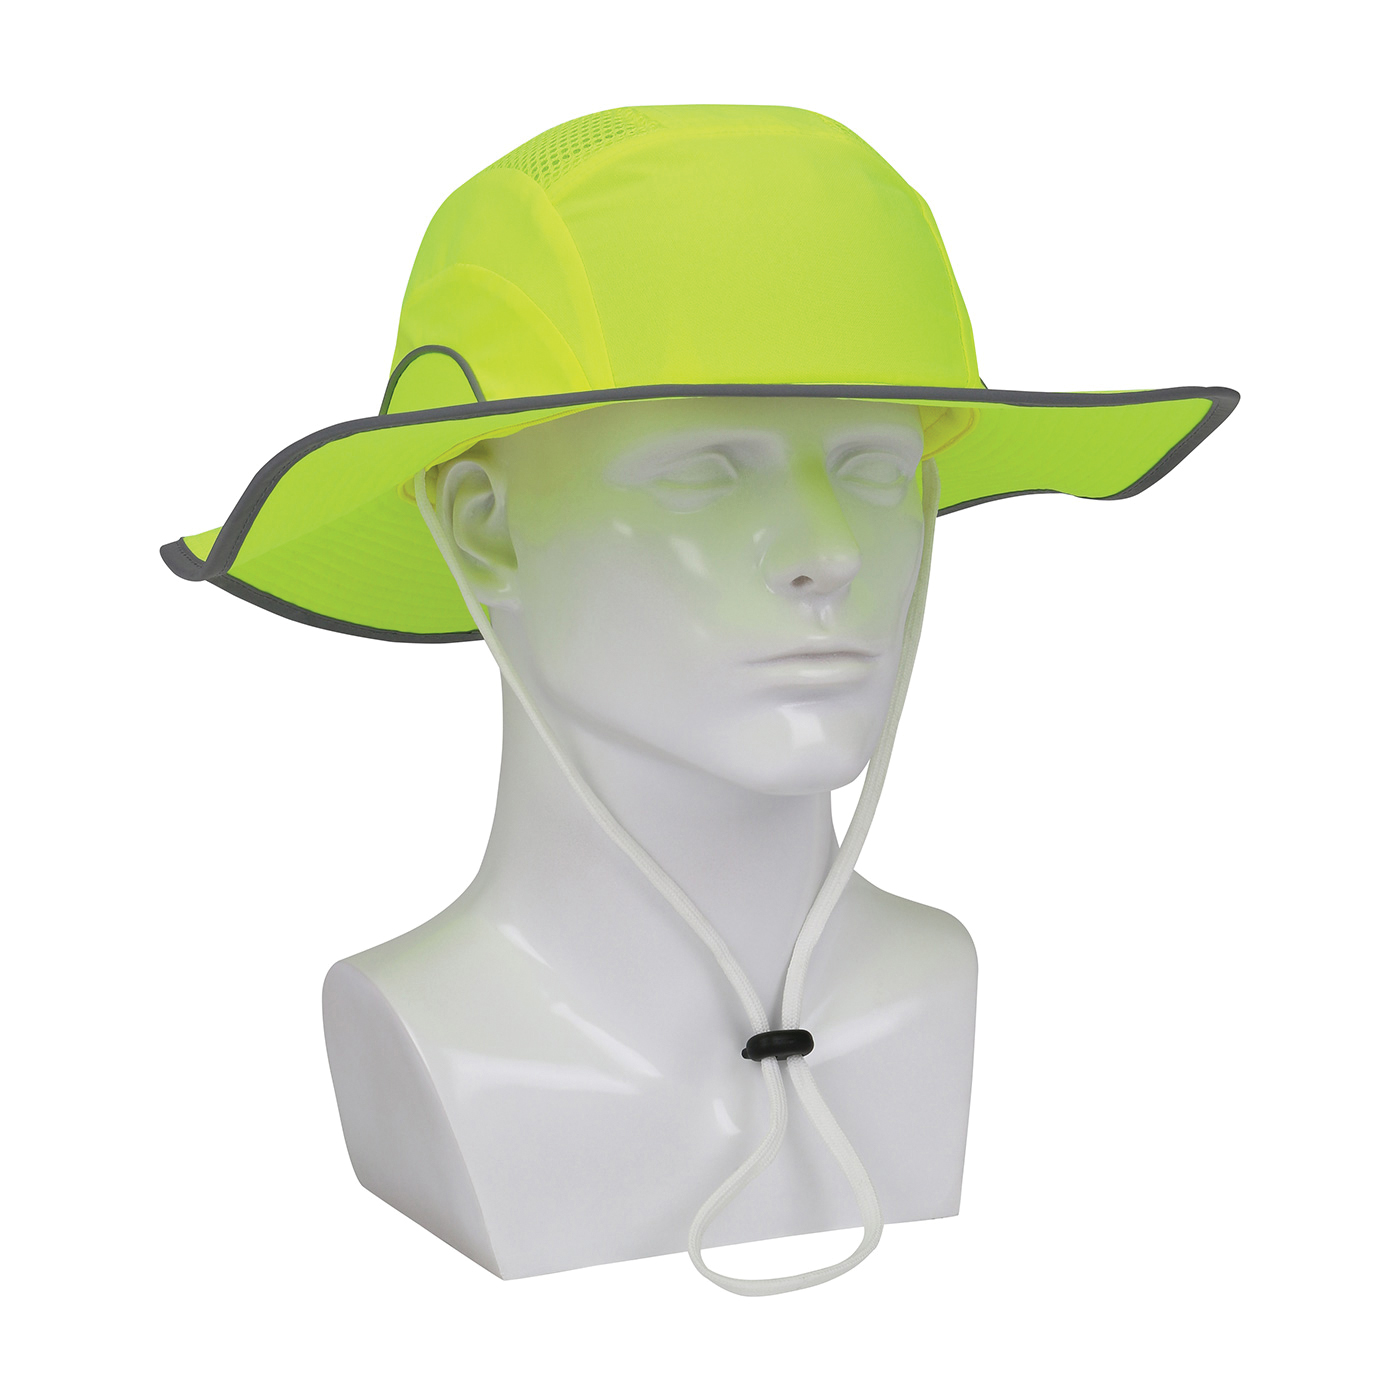 PIP® HARDCAP A1+™ 282-AFB375-LY Adjustable Back Full Brim Ranger Style Bump Cap, OS, Hi-Viz Lime Yellow, HDPE with EVA Foam Padding Liner/Polyester Cap, Adjustable Chinstrap Suspension, Specifications Met: EN812 A1